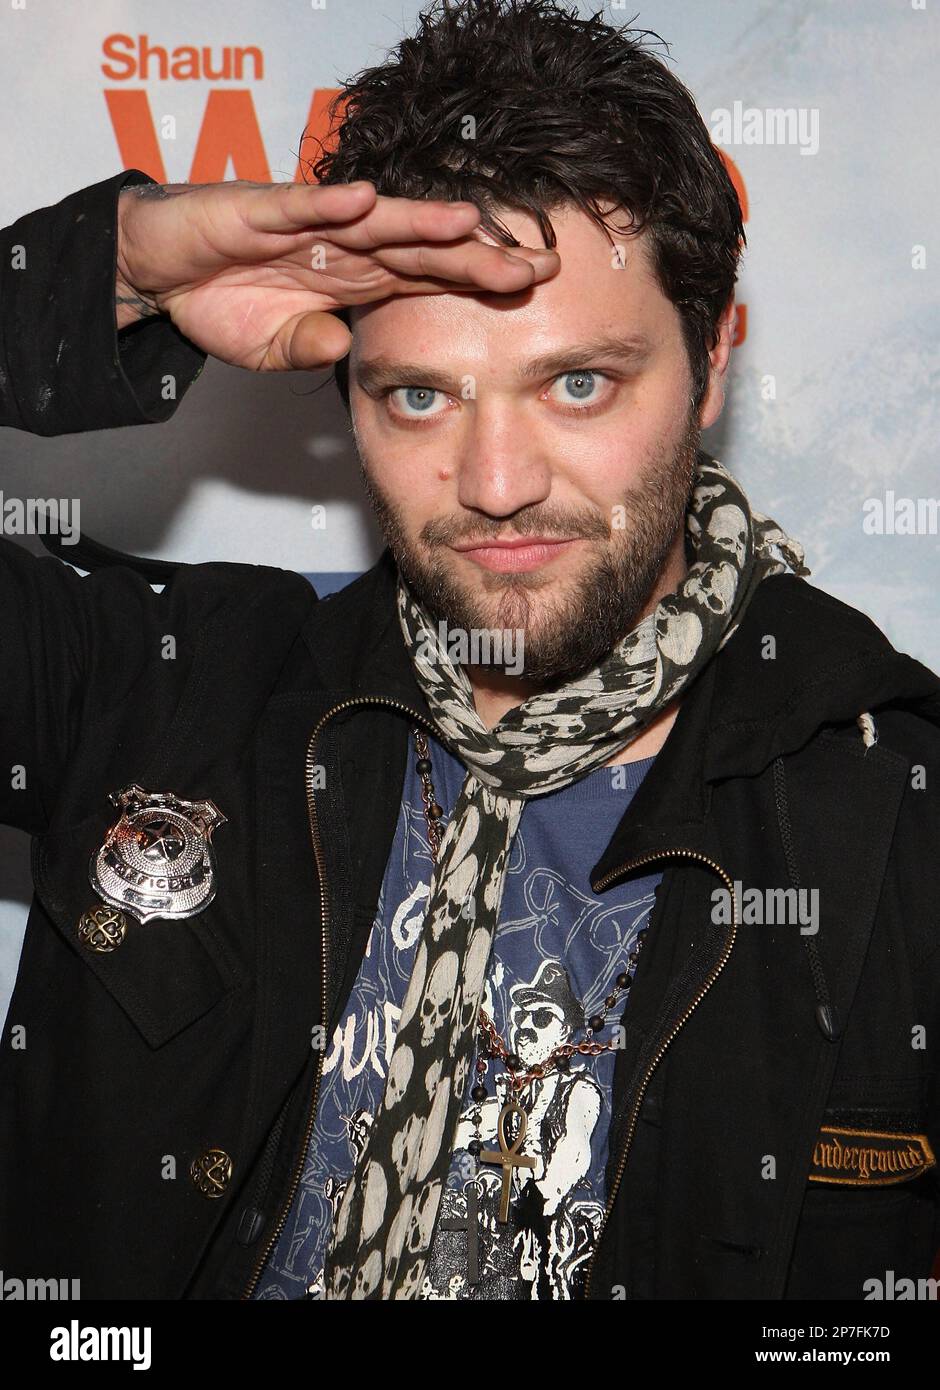 FILE - In this Nov. 11, 2008 file photo, Bam Margera attends the Shaun White  Snowboarding Video Game Launch Party in Los Angeles. (AP Photo/Shea Walsh,  file Stock Photo - Alamy